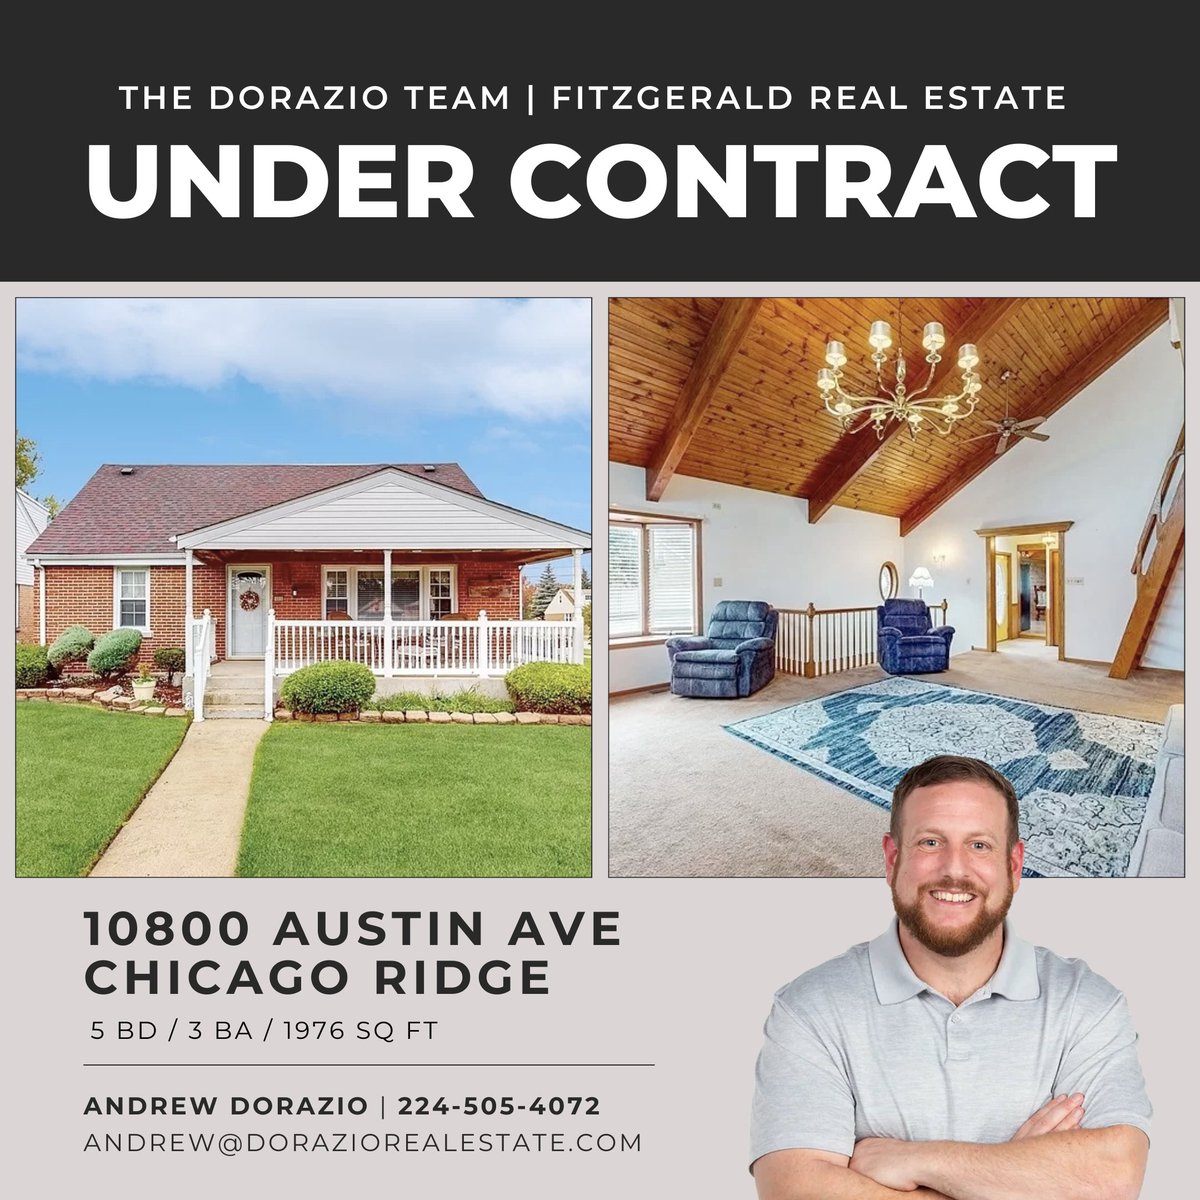 🏡 Congrats to our seller on getting this attractive and feature-rich home #undercontract in #ChicagoRidge! Tons of curb appeal and an amazing interior with massive potential here for the new owners. 👏🏼

Looking to sell? Give us a ring! ☎️ 224-505-4072 
#doraziorealestate